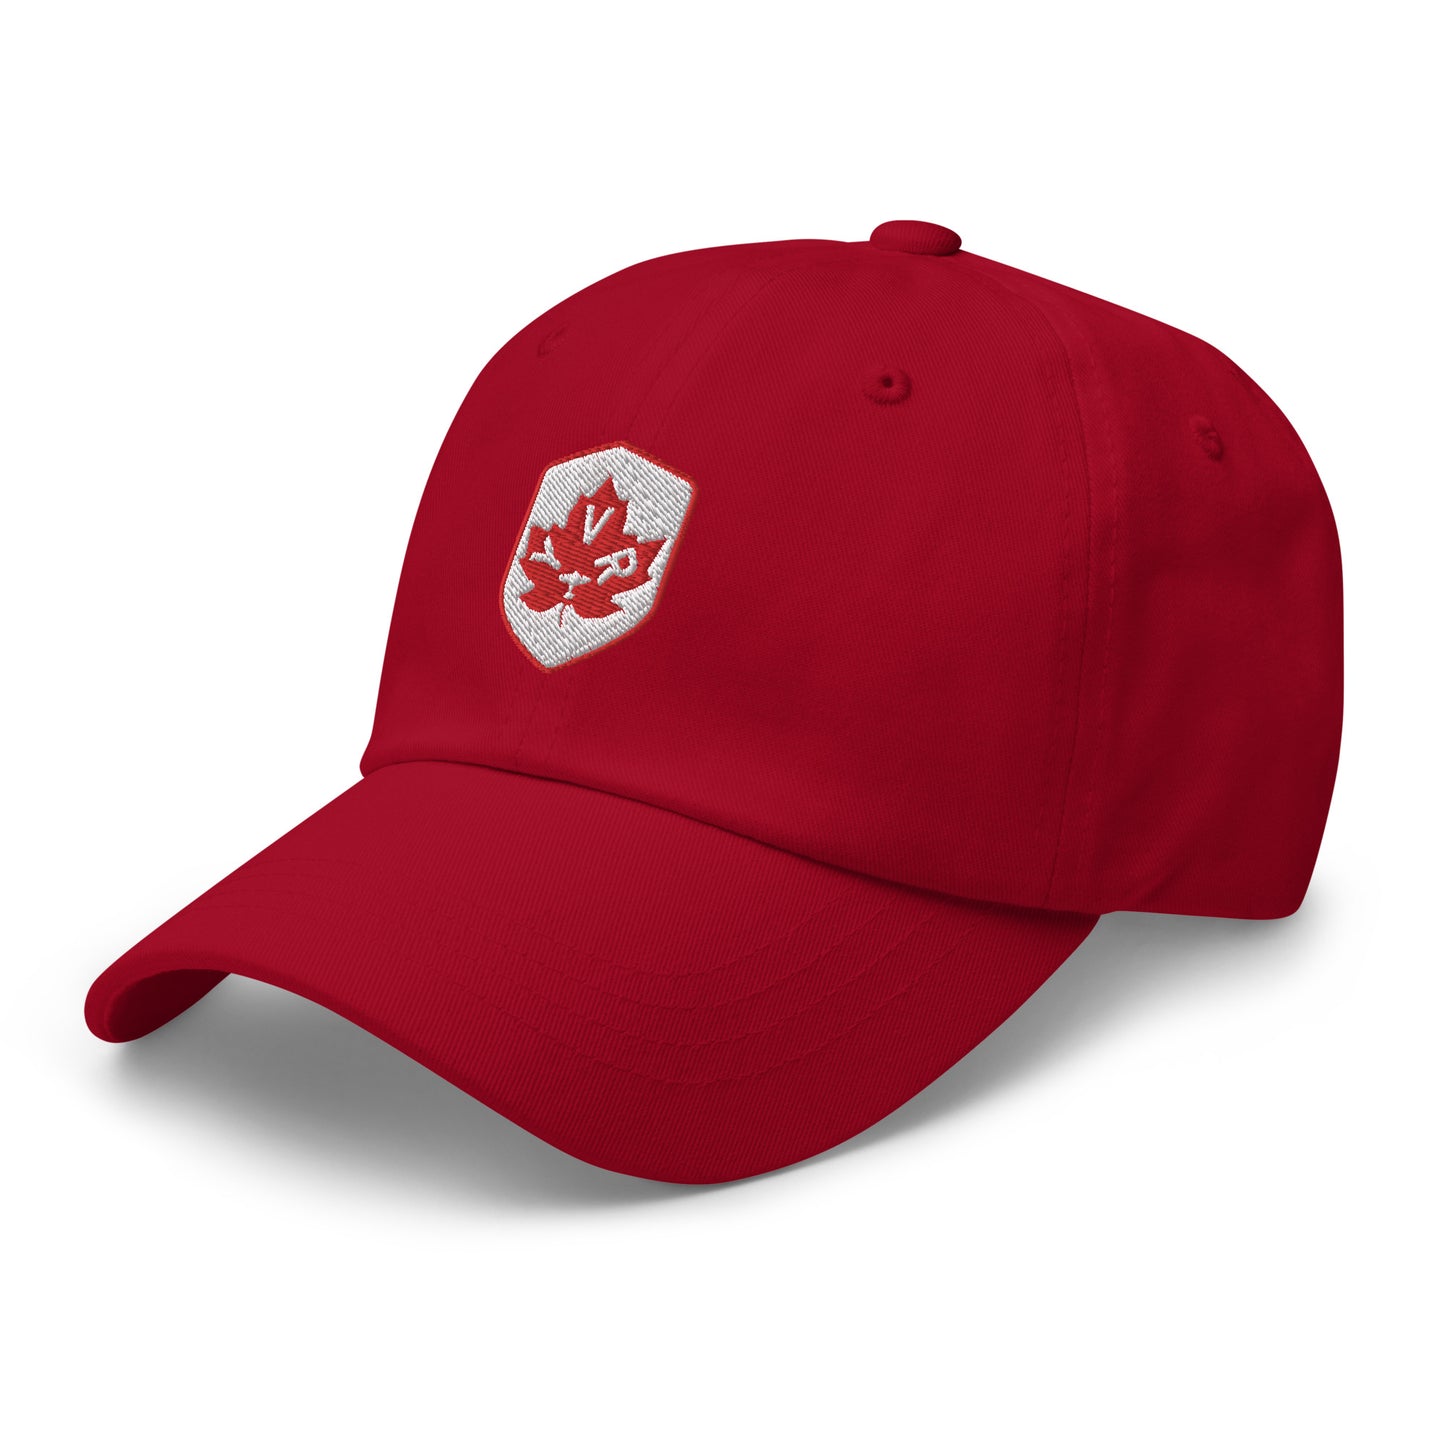 Maple Leaf Baseball Cap - Red/White • YVR Vancouver • YHM Designs - Image 16